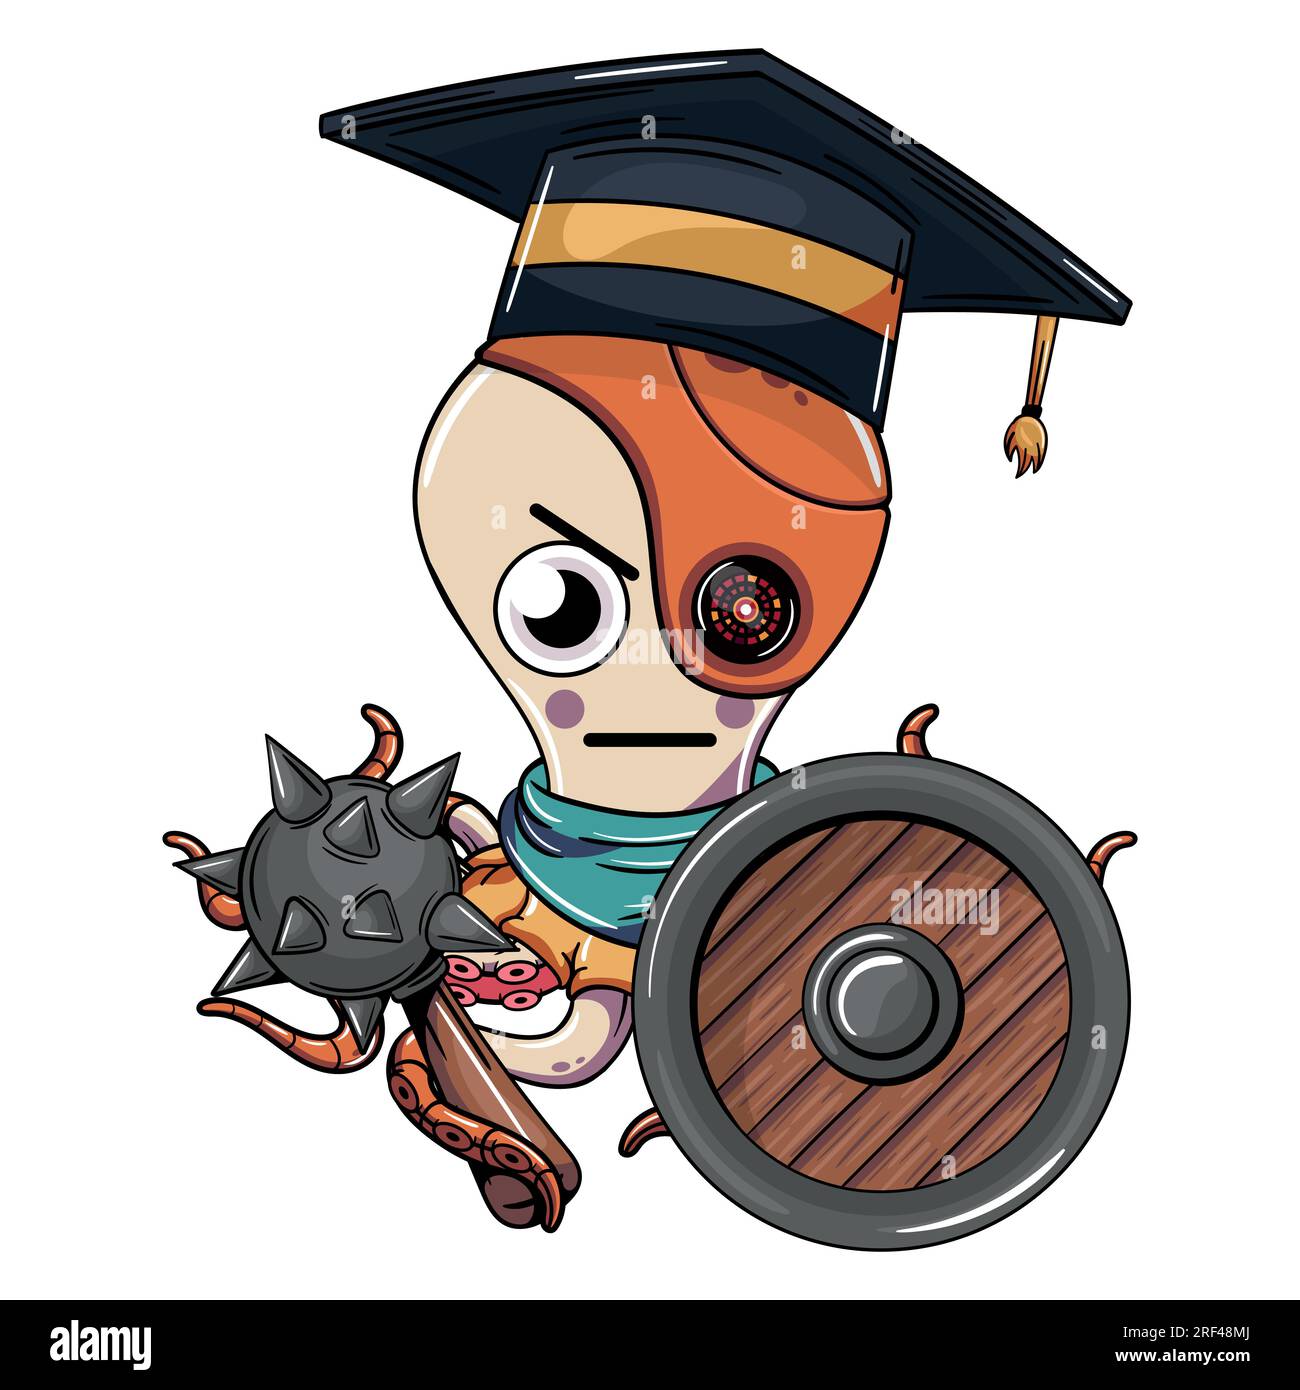 Cartoon cyborg octopus character wearing graduation cap upset with a shield and a war axe. Illustration for fantasy, science fiction and adventure com Stock Vector